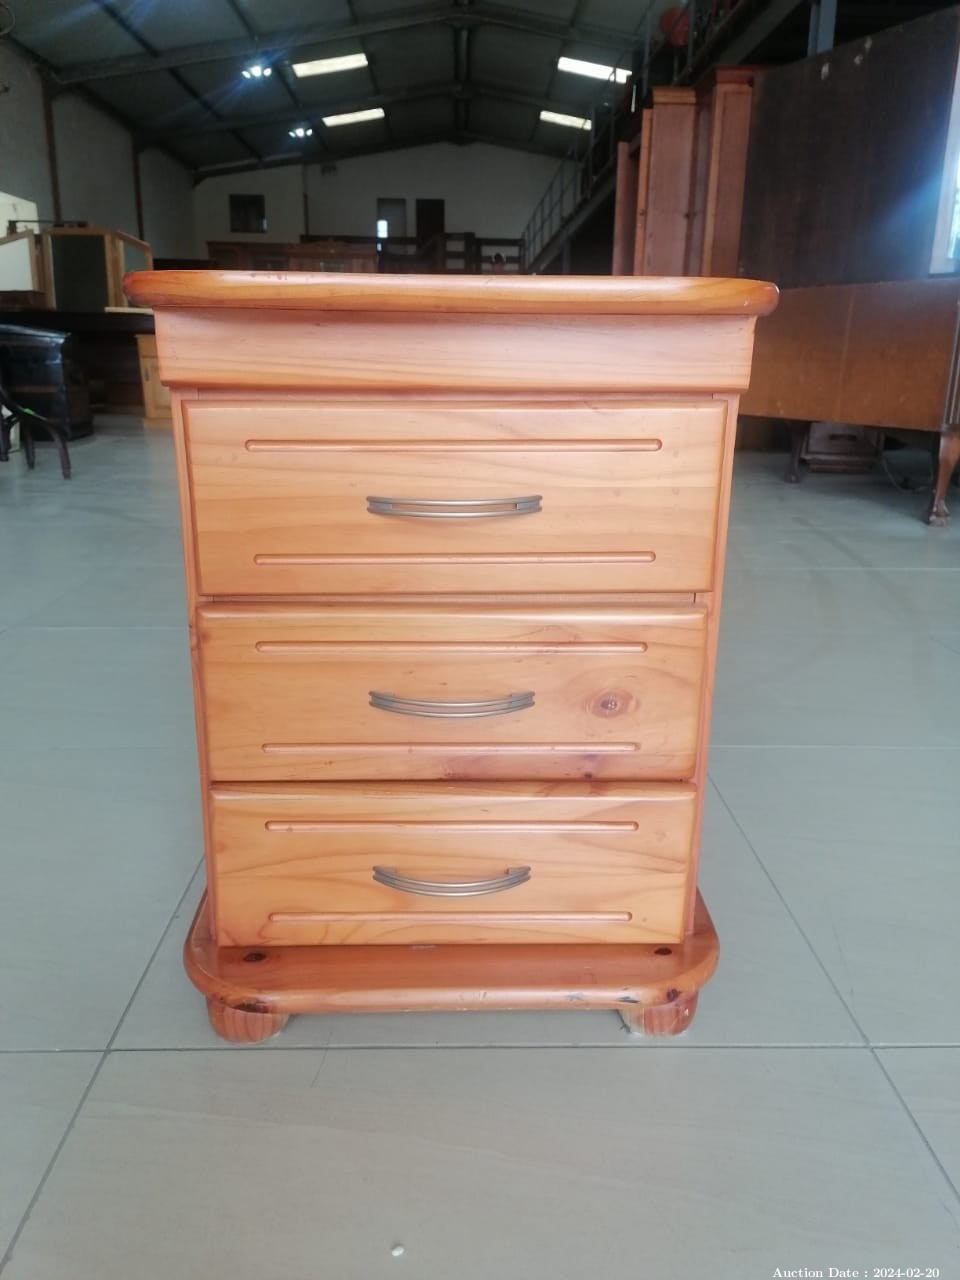 5461 - Lovely Solid Wood Bedside Drawers